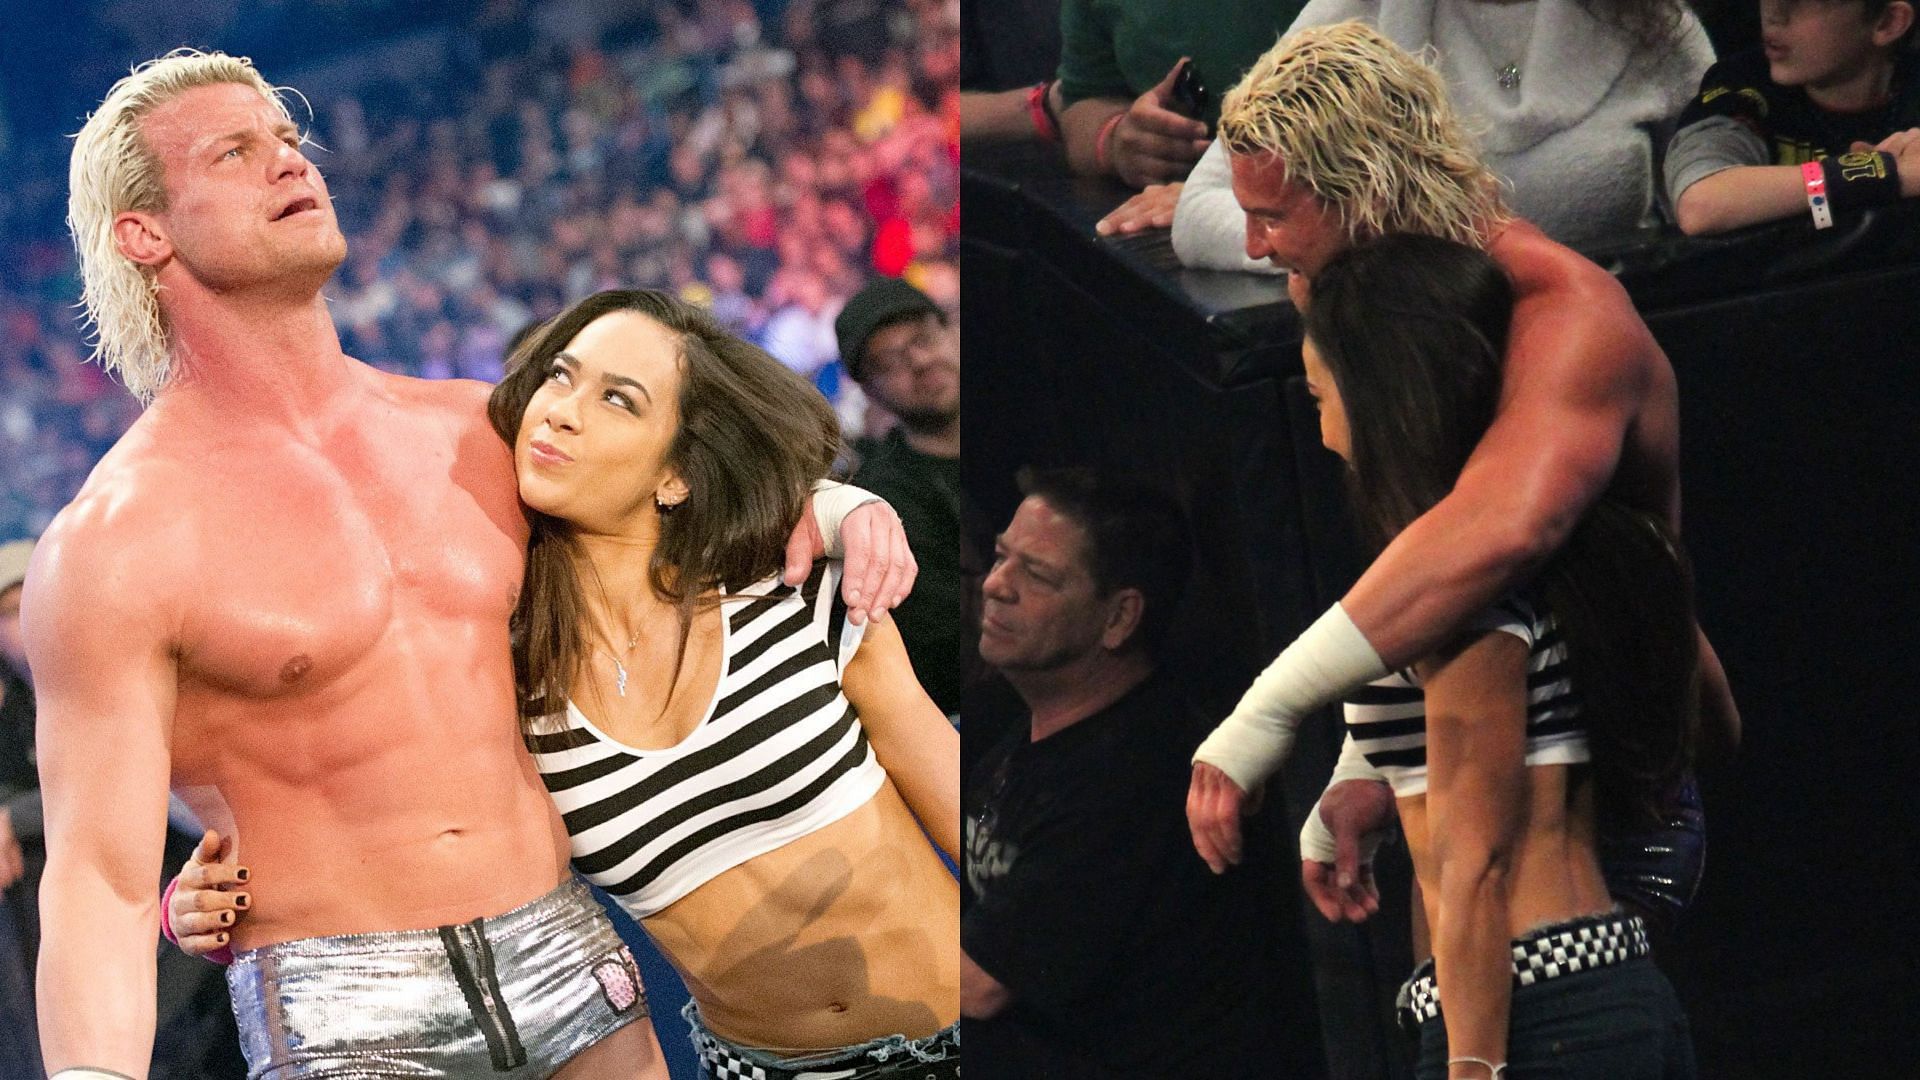 Dolph Ziggler and AJ Lee were an on-screen couple